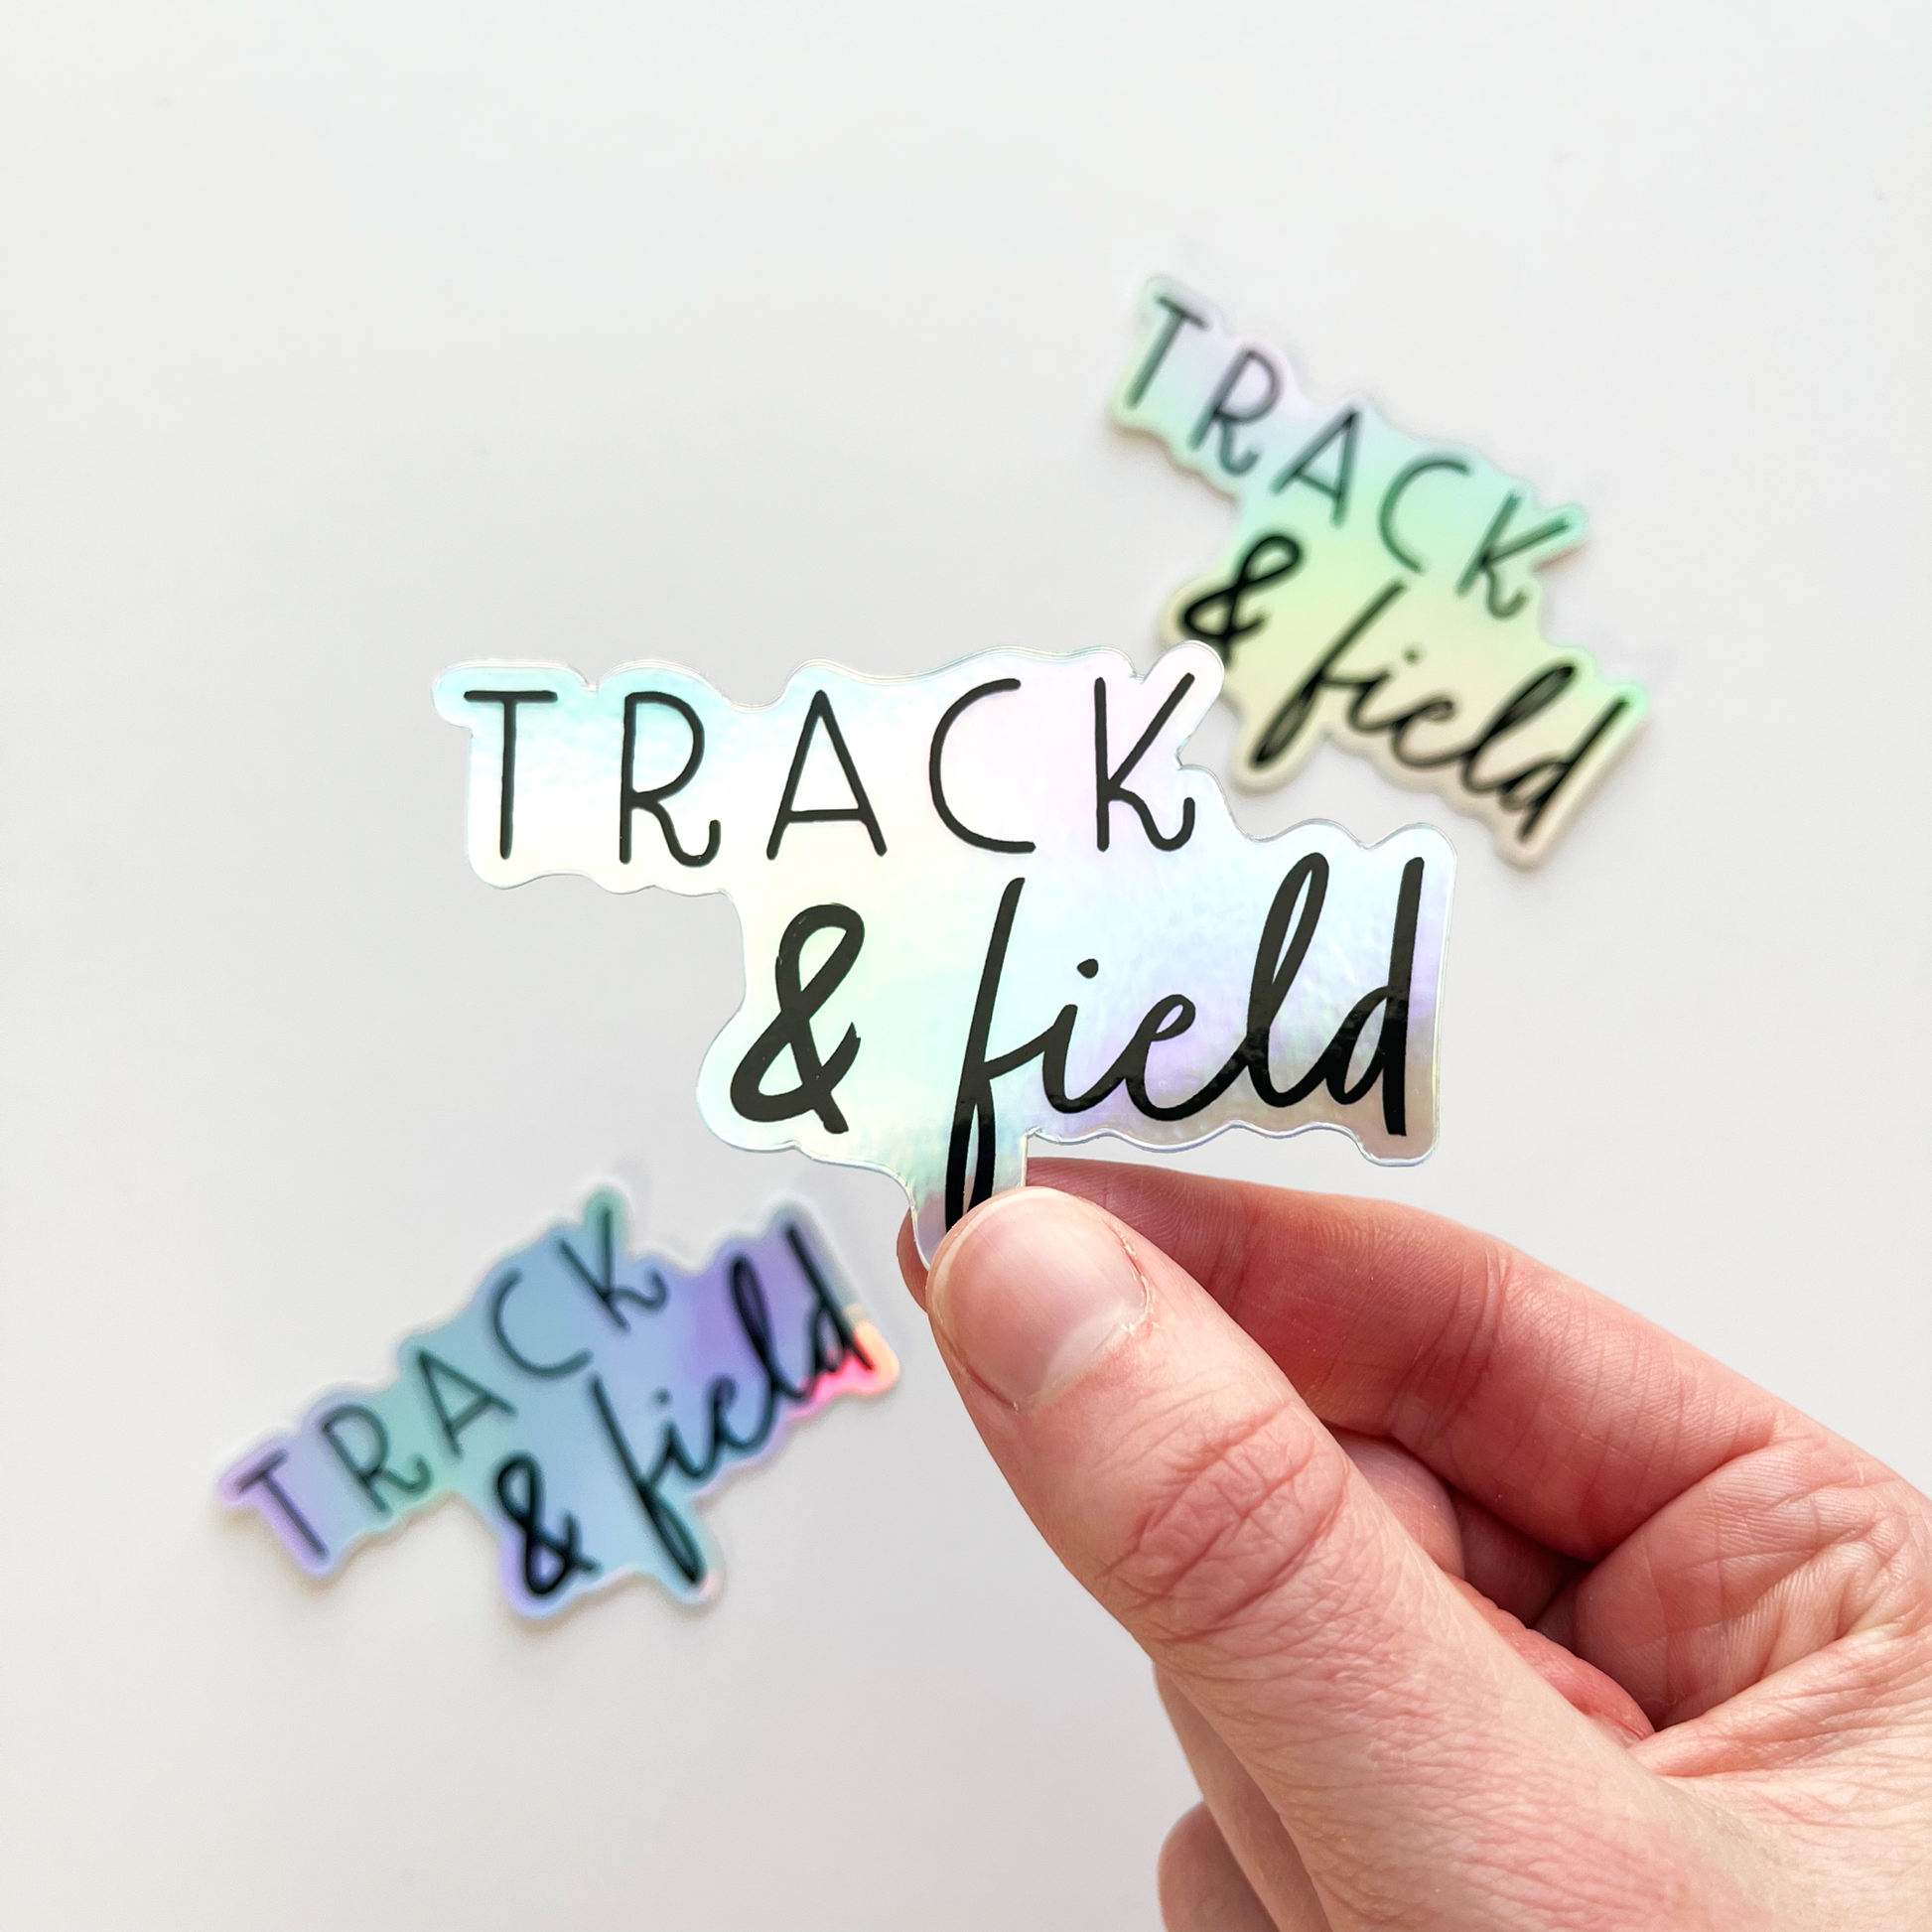 Holographic track and field sticker